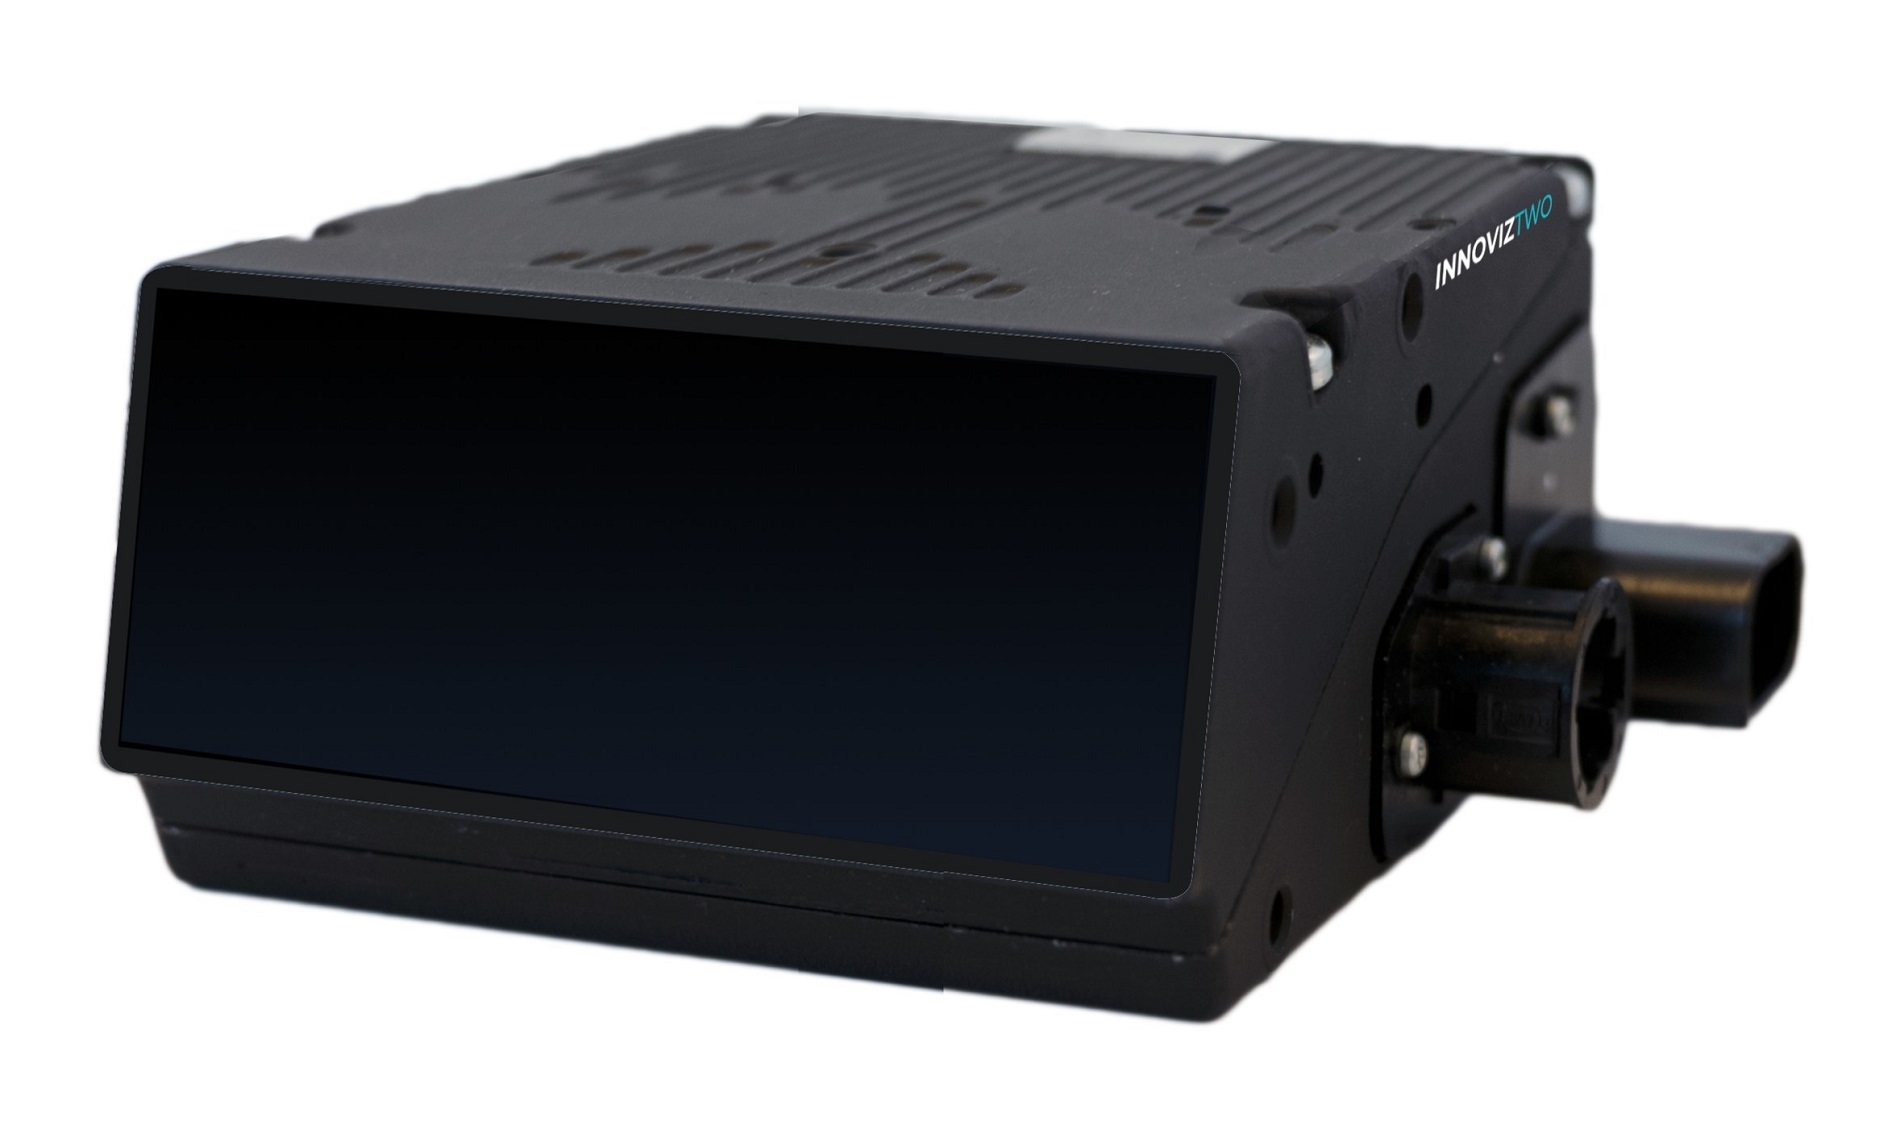 The new InnovizTwo high-performance automotive-grade LiDAR sensor offers a fully featured solution for all levels of autonomous driving at a dramatically lower cost.